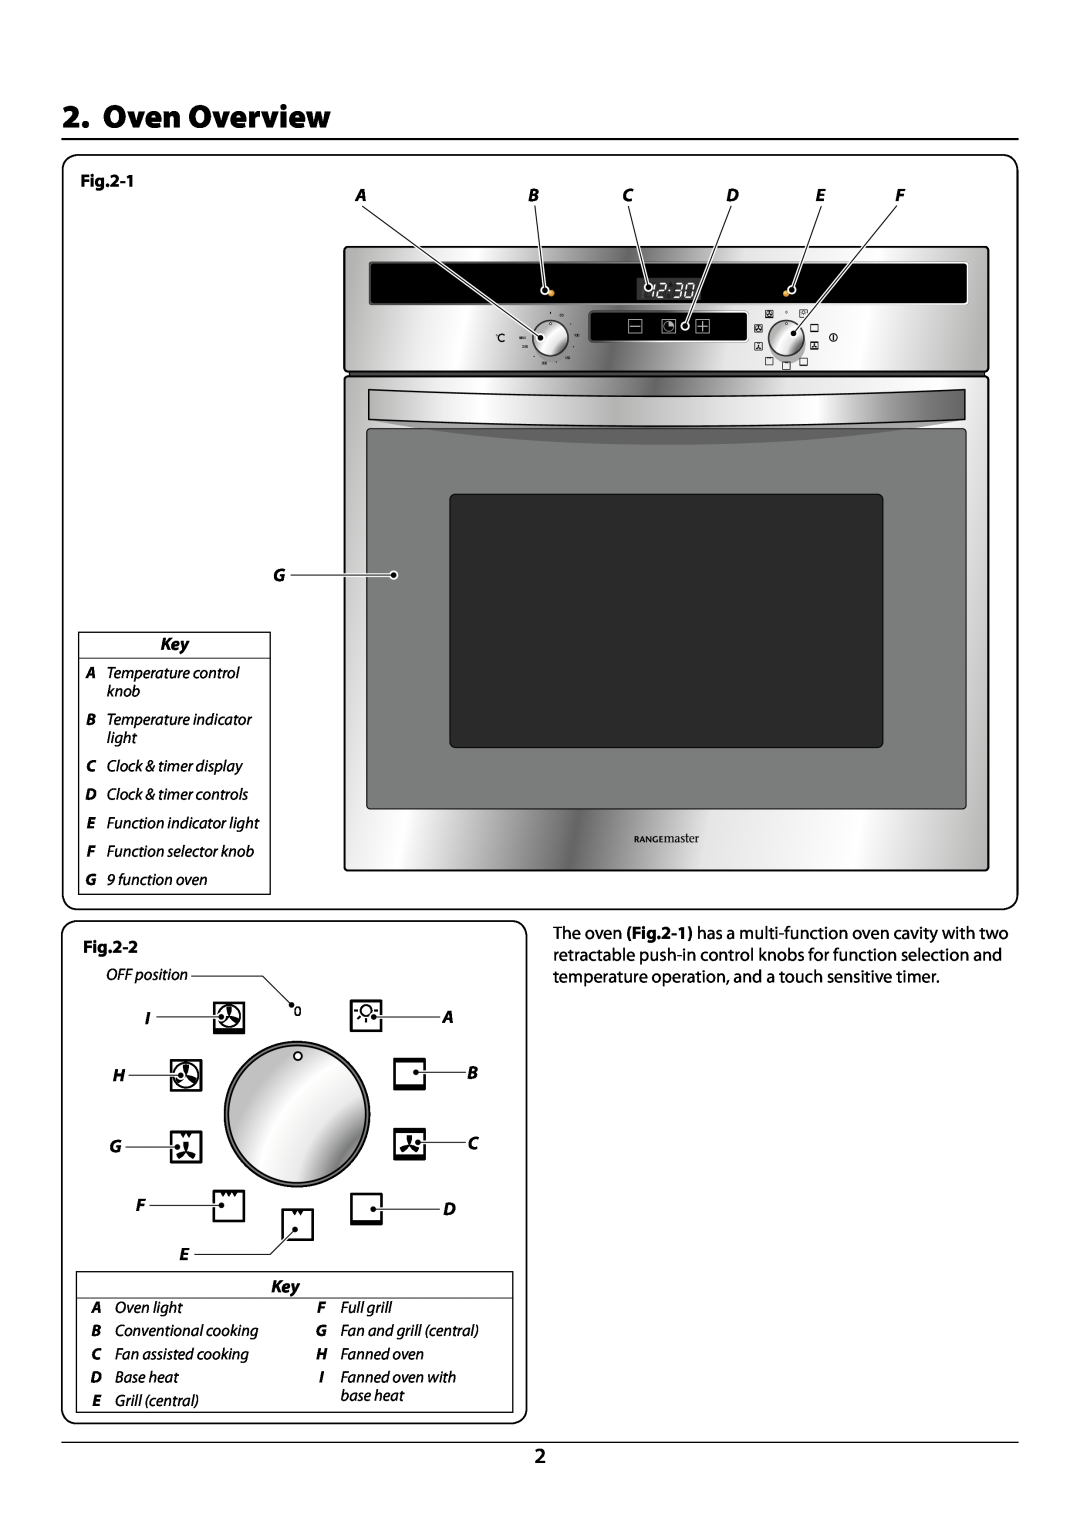 Rangemaster R609 manual Oven Overview, 1, Oven light, Full grill, Base heat, Fanned oven with, Grill central, base heat 